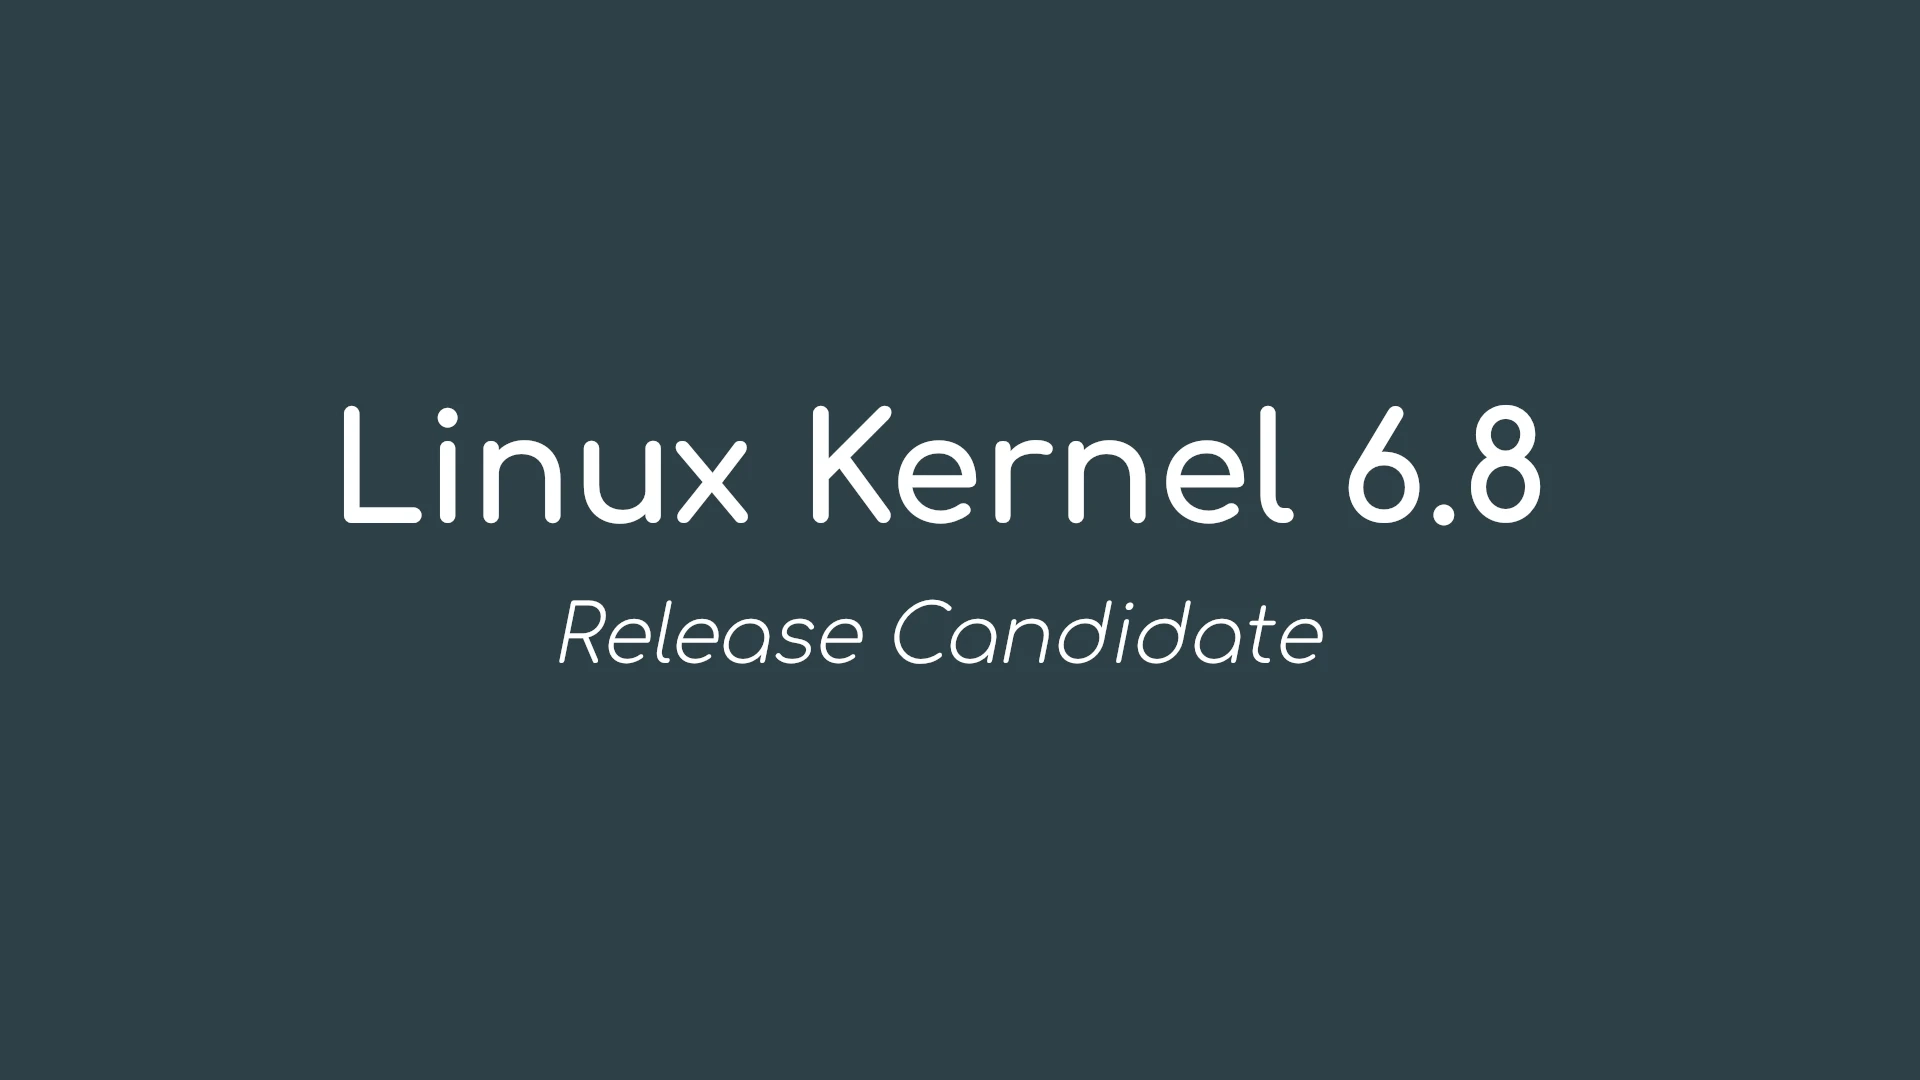 Announcement of the First Linux Kernel 6.8 Release Candidate by Linus Torvalds